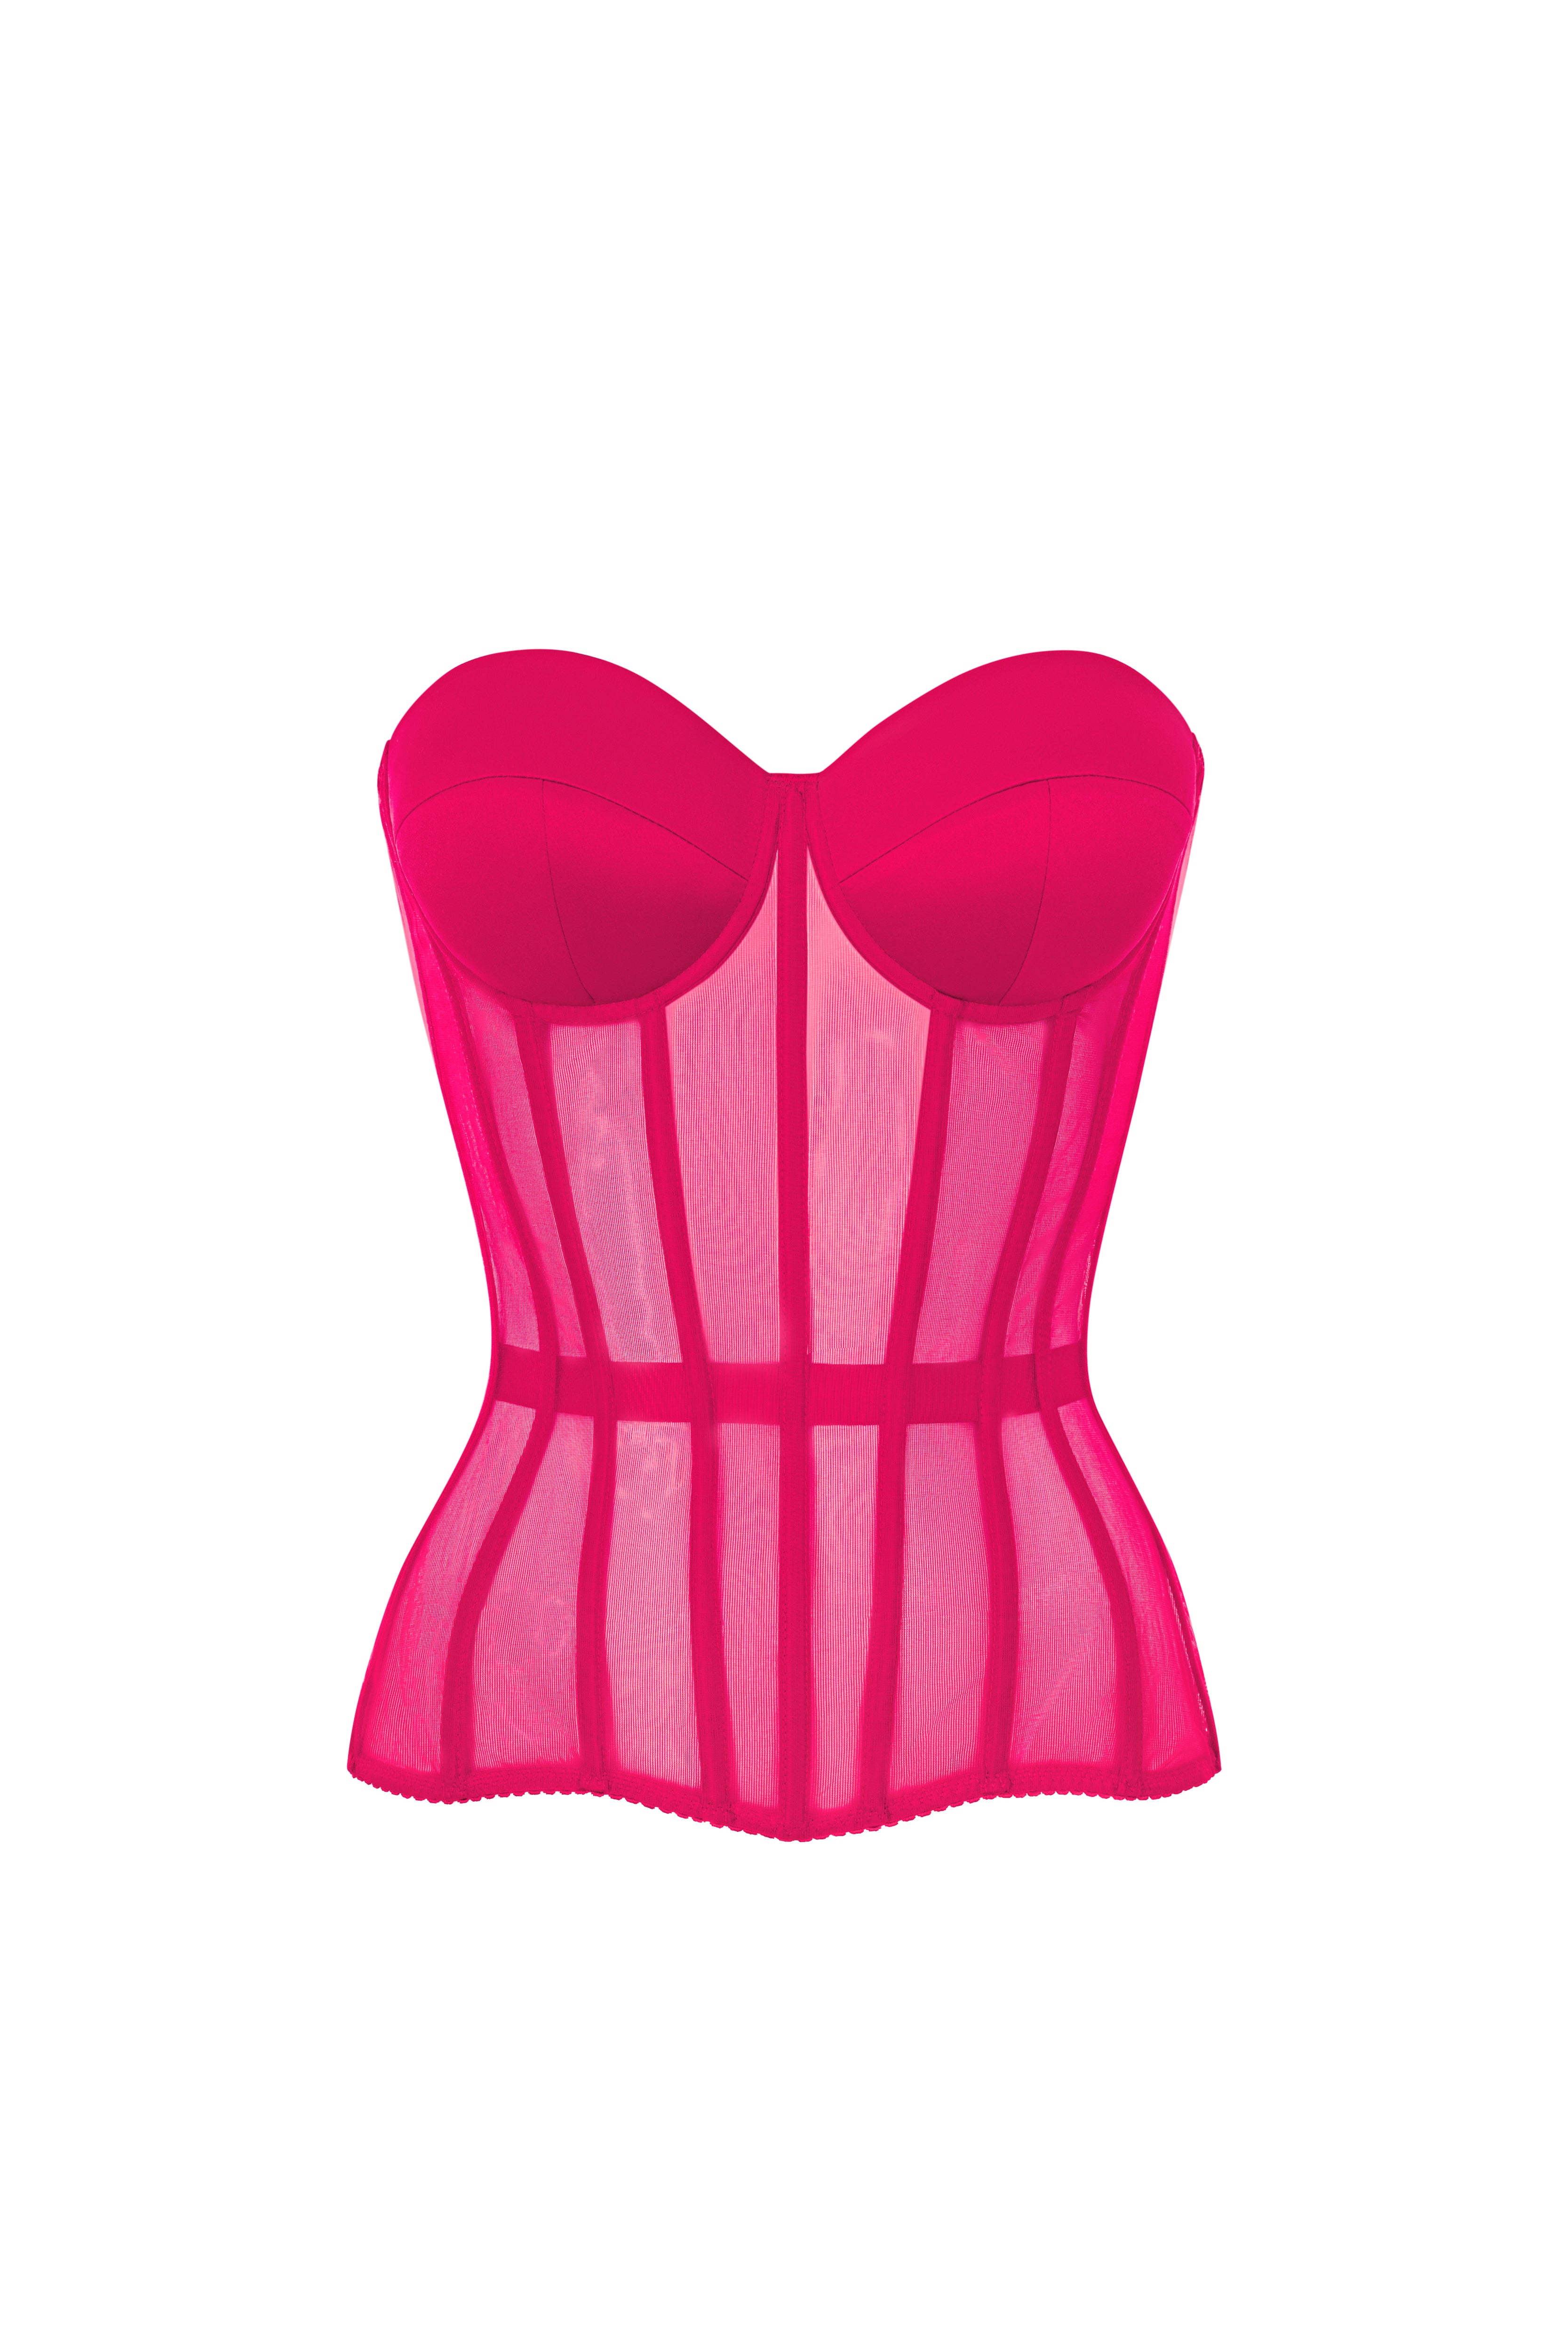 Hot pink corset with cups - STATNAIA